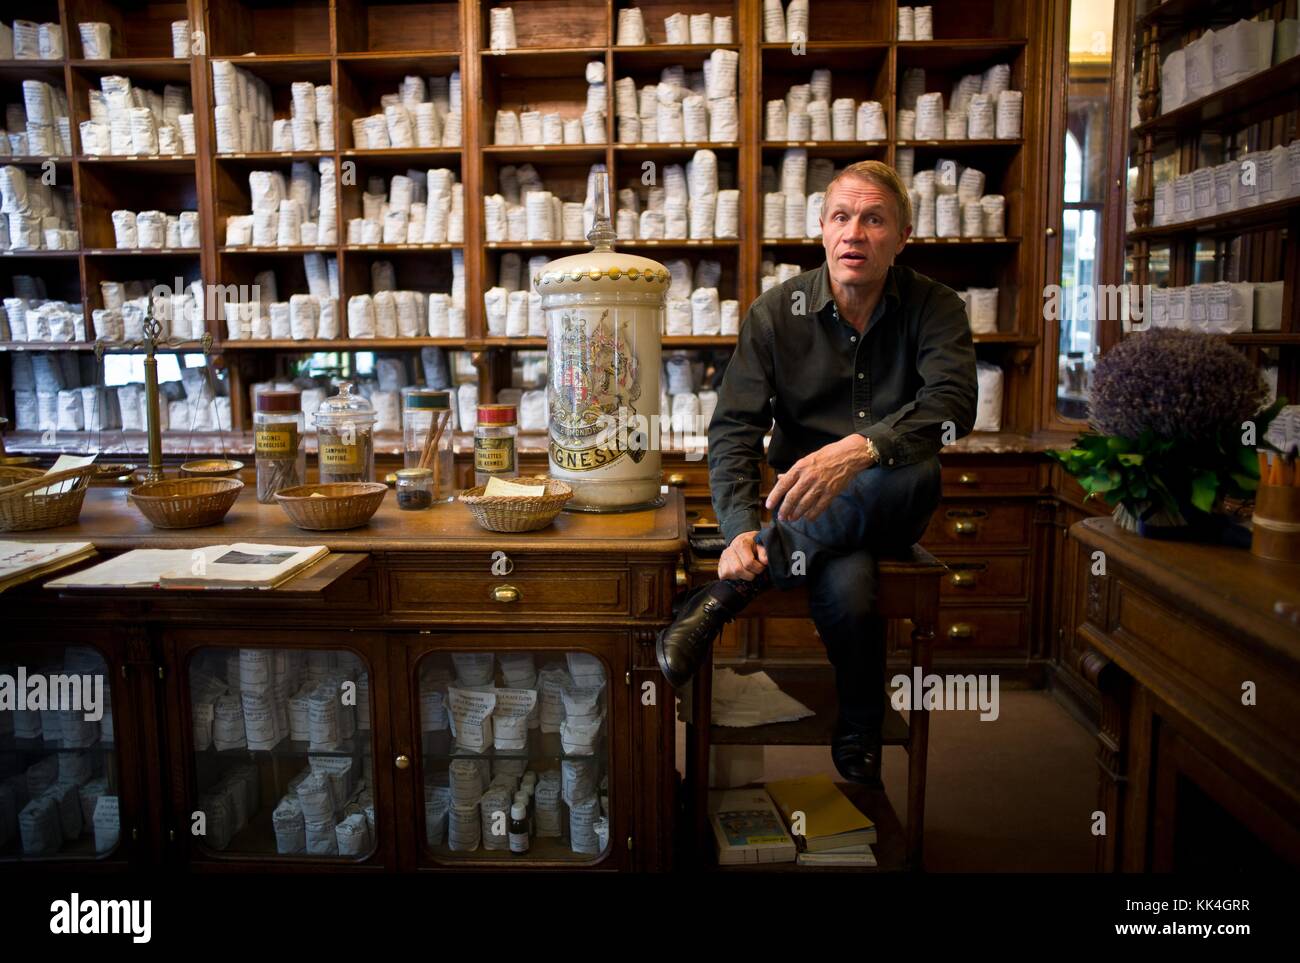 the traditional herbal medicine in danger  -  26/09/2011  -  France / Ile-de-France (region) / Paris  -  Portrait of Jean-Pierre Raveneau, Biologist and Doctor of Pharmacy,revolts of the current policy has strayed from that noble medicine   -  Sylvain Leser / Le Pictorium Stock Photo